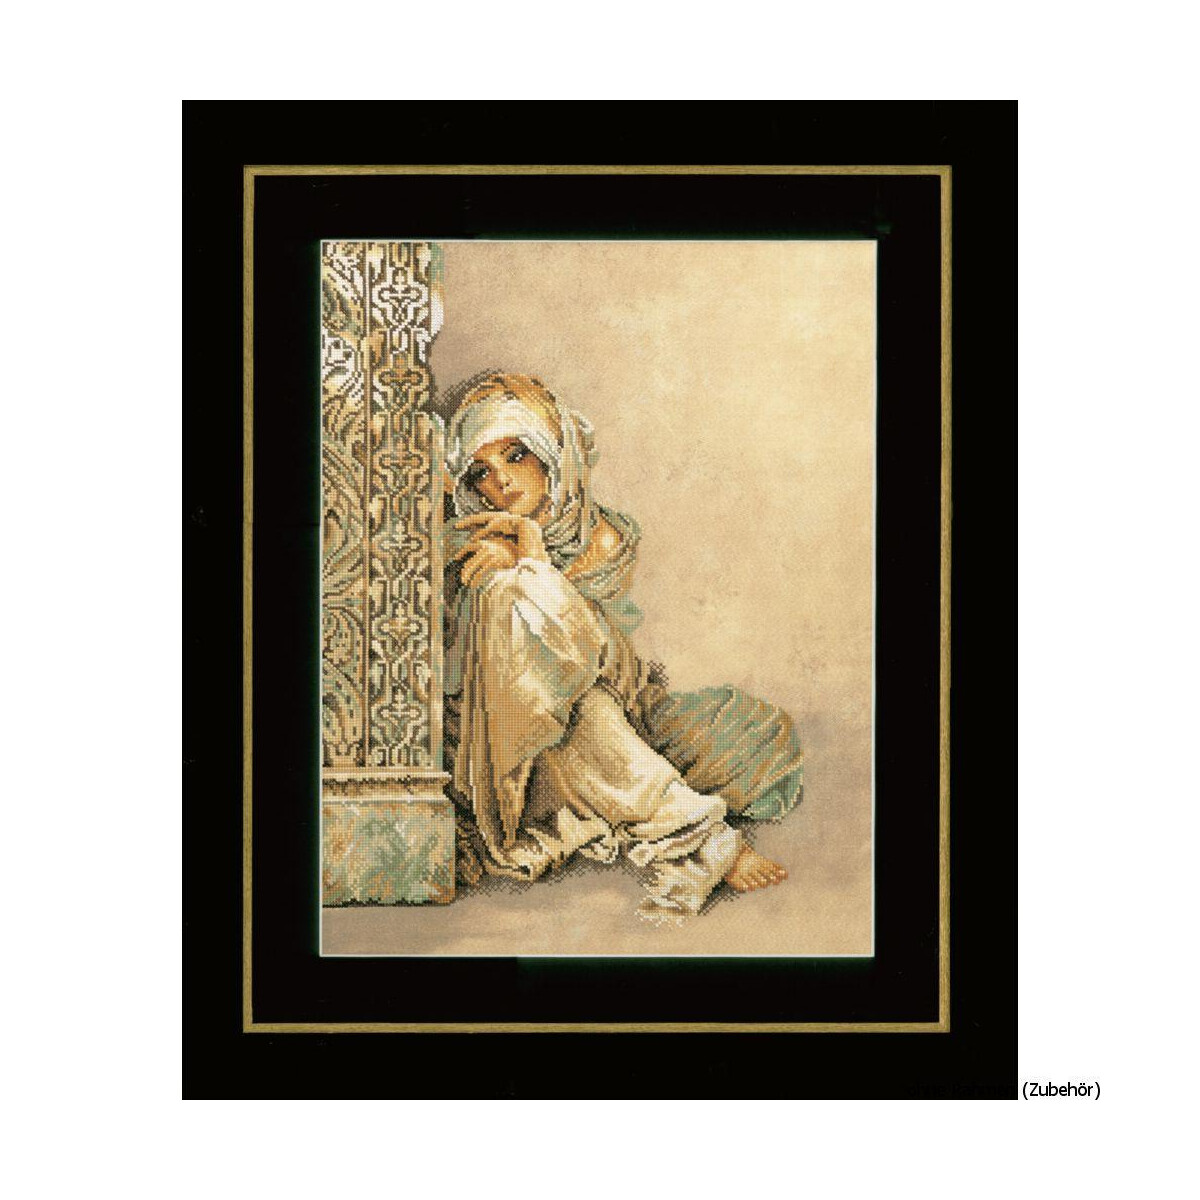 A framed artwork shows a person in traditional dress...